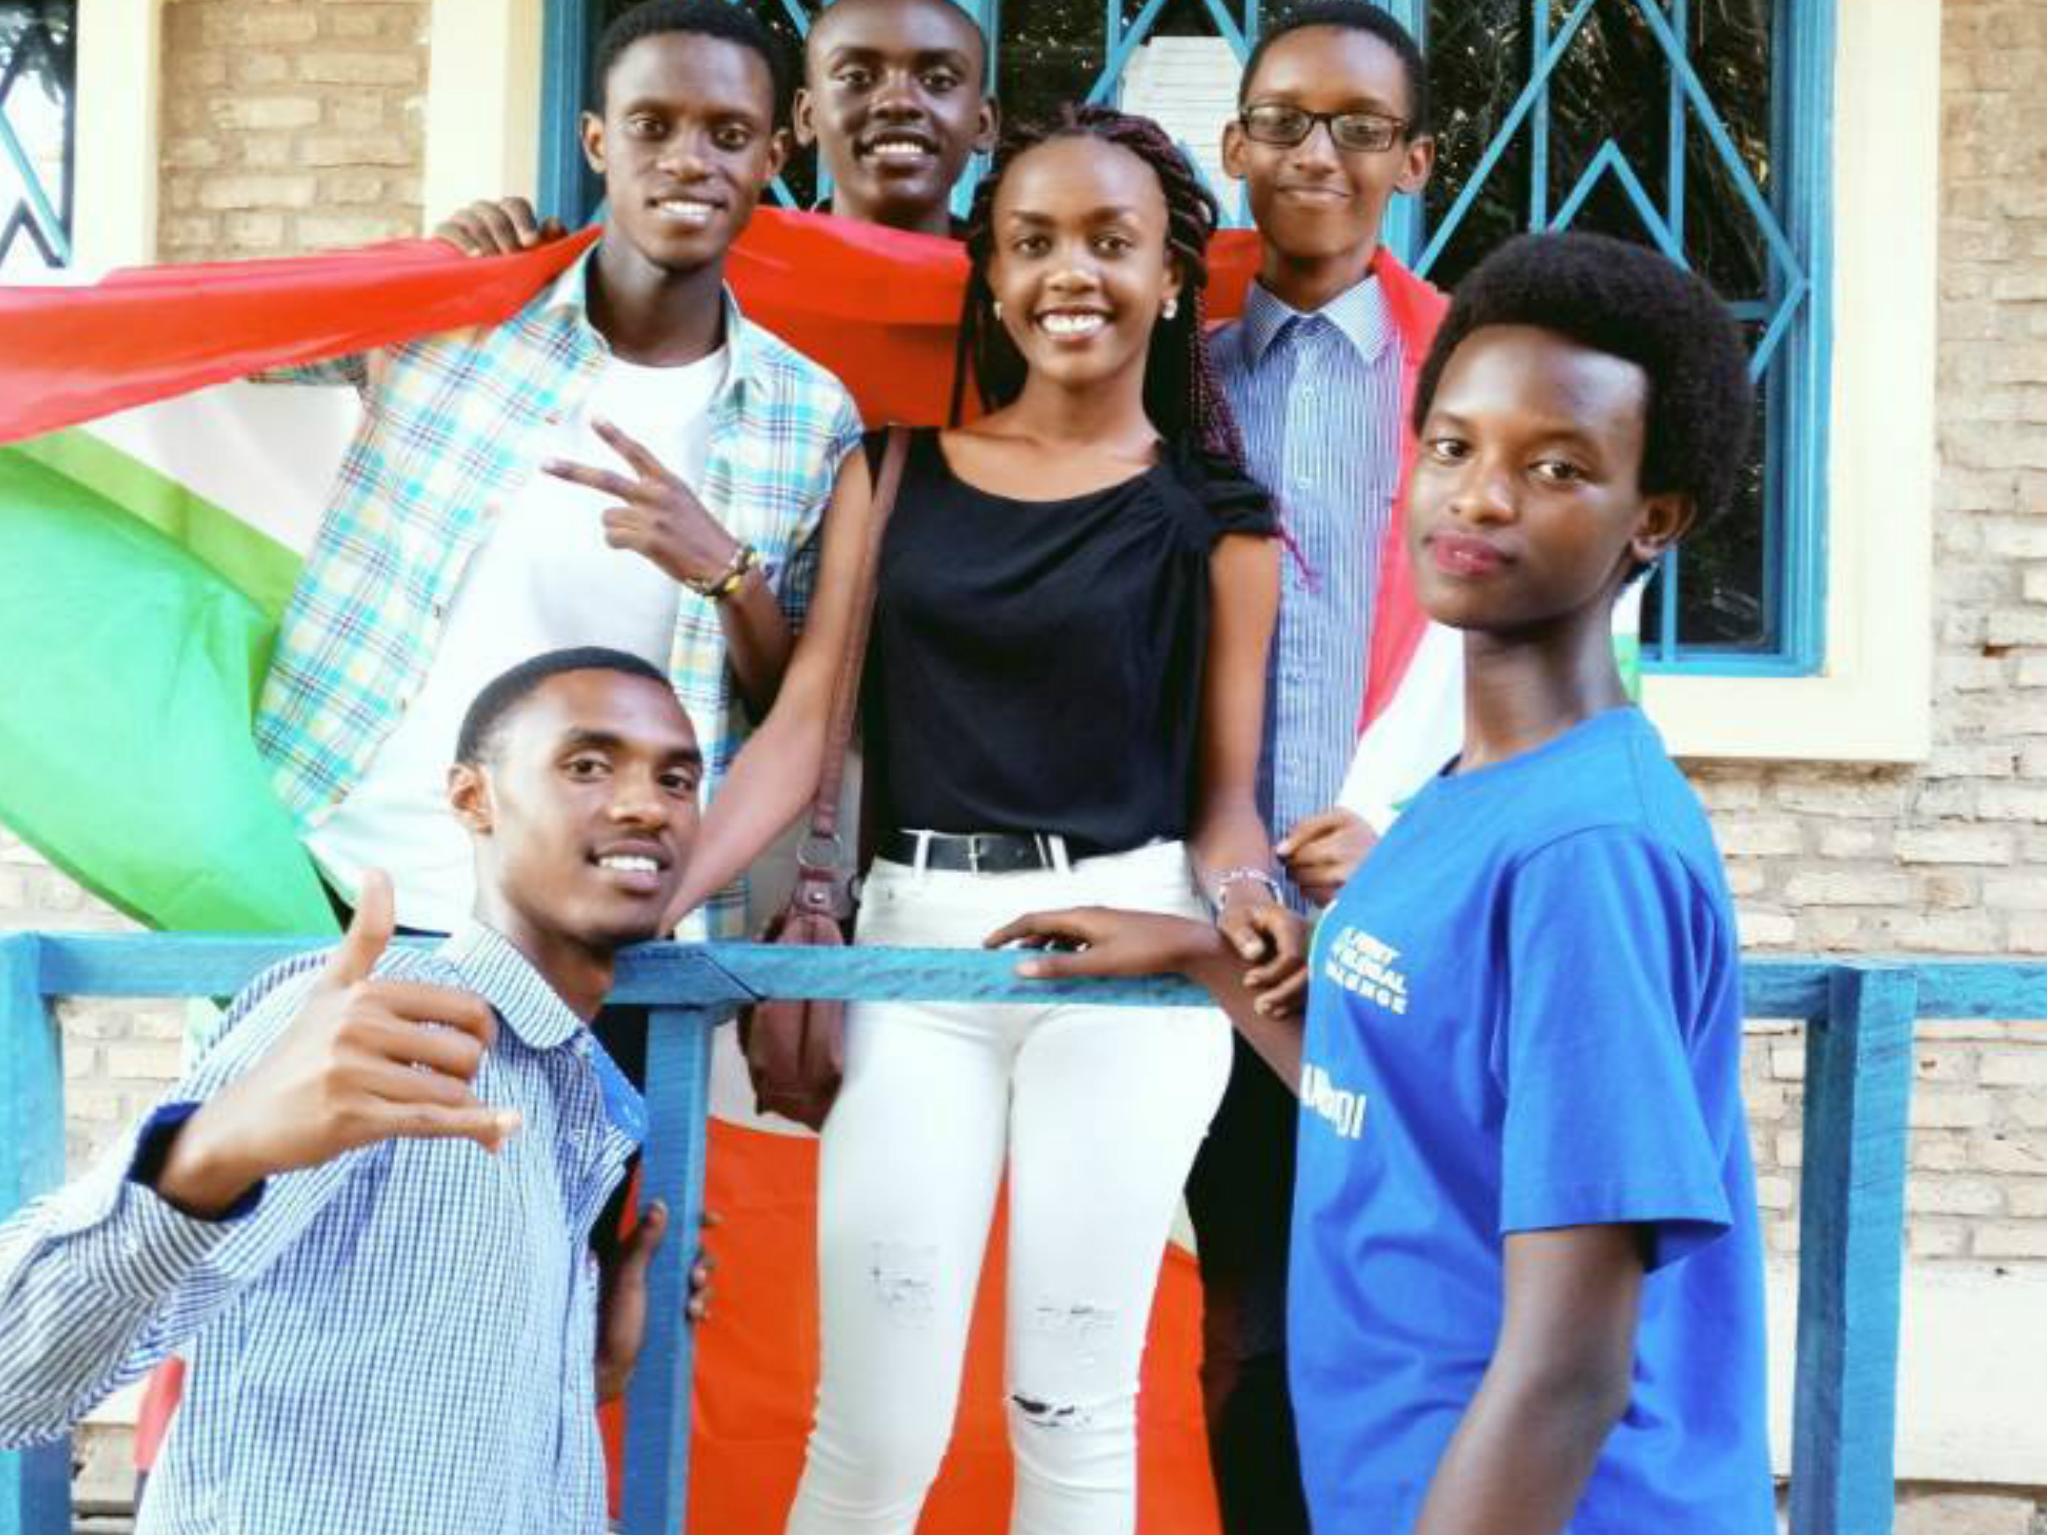 The Burundi team of teenagers participating in the international robotics competition in Washington DC have been reported missing